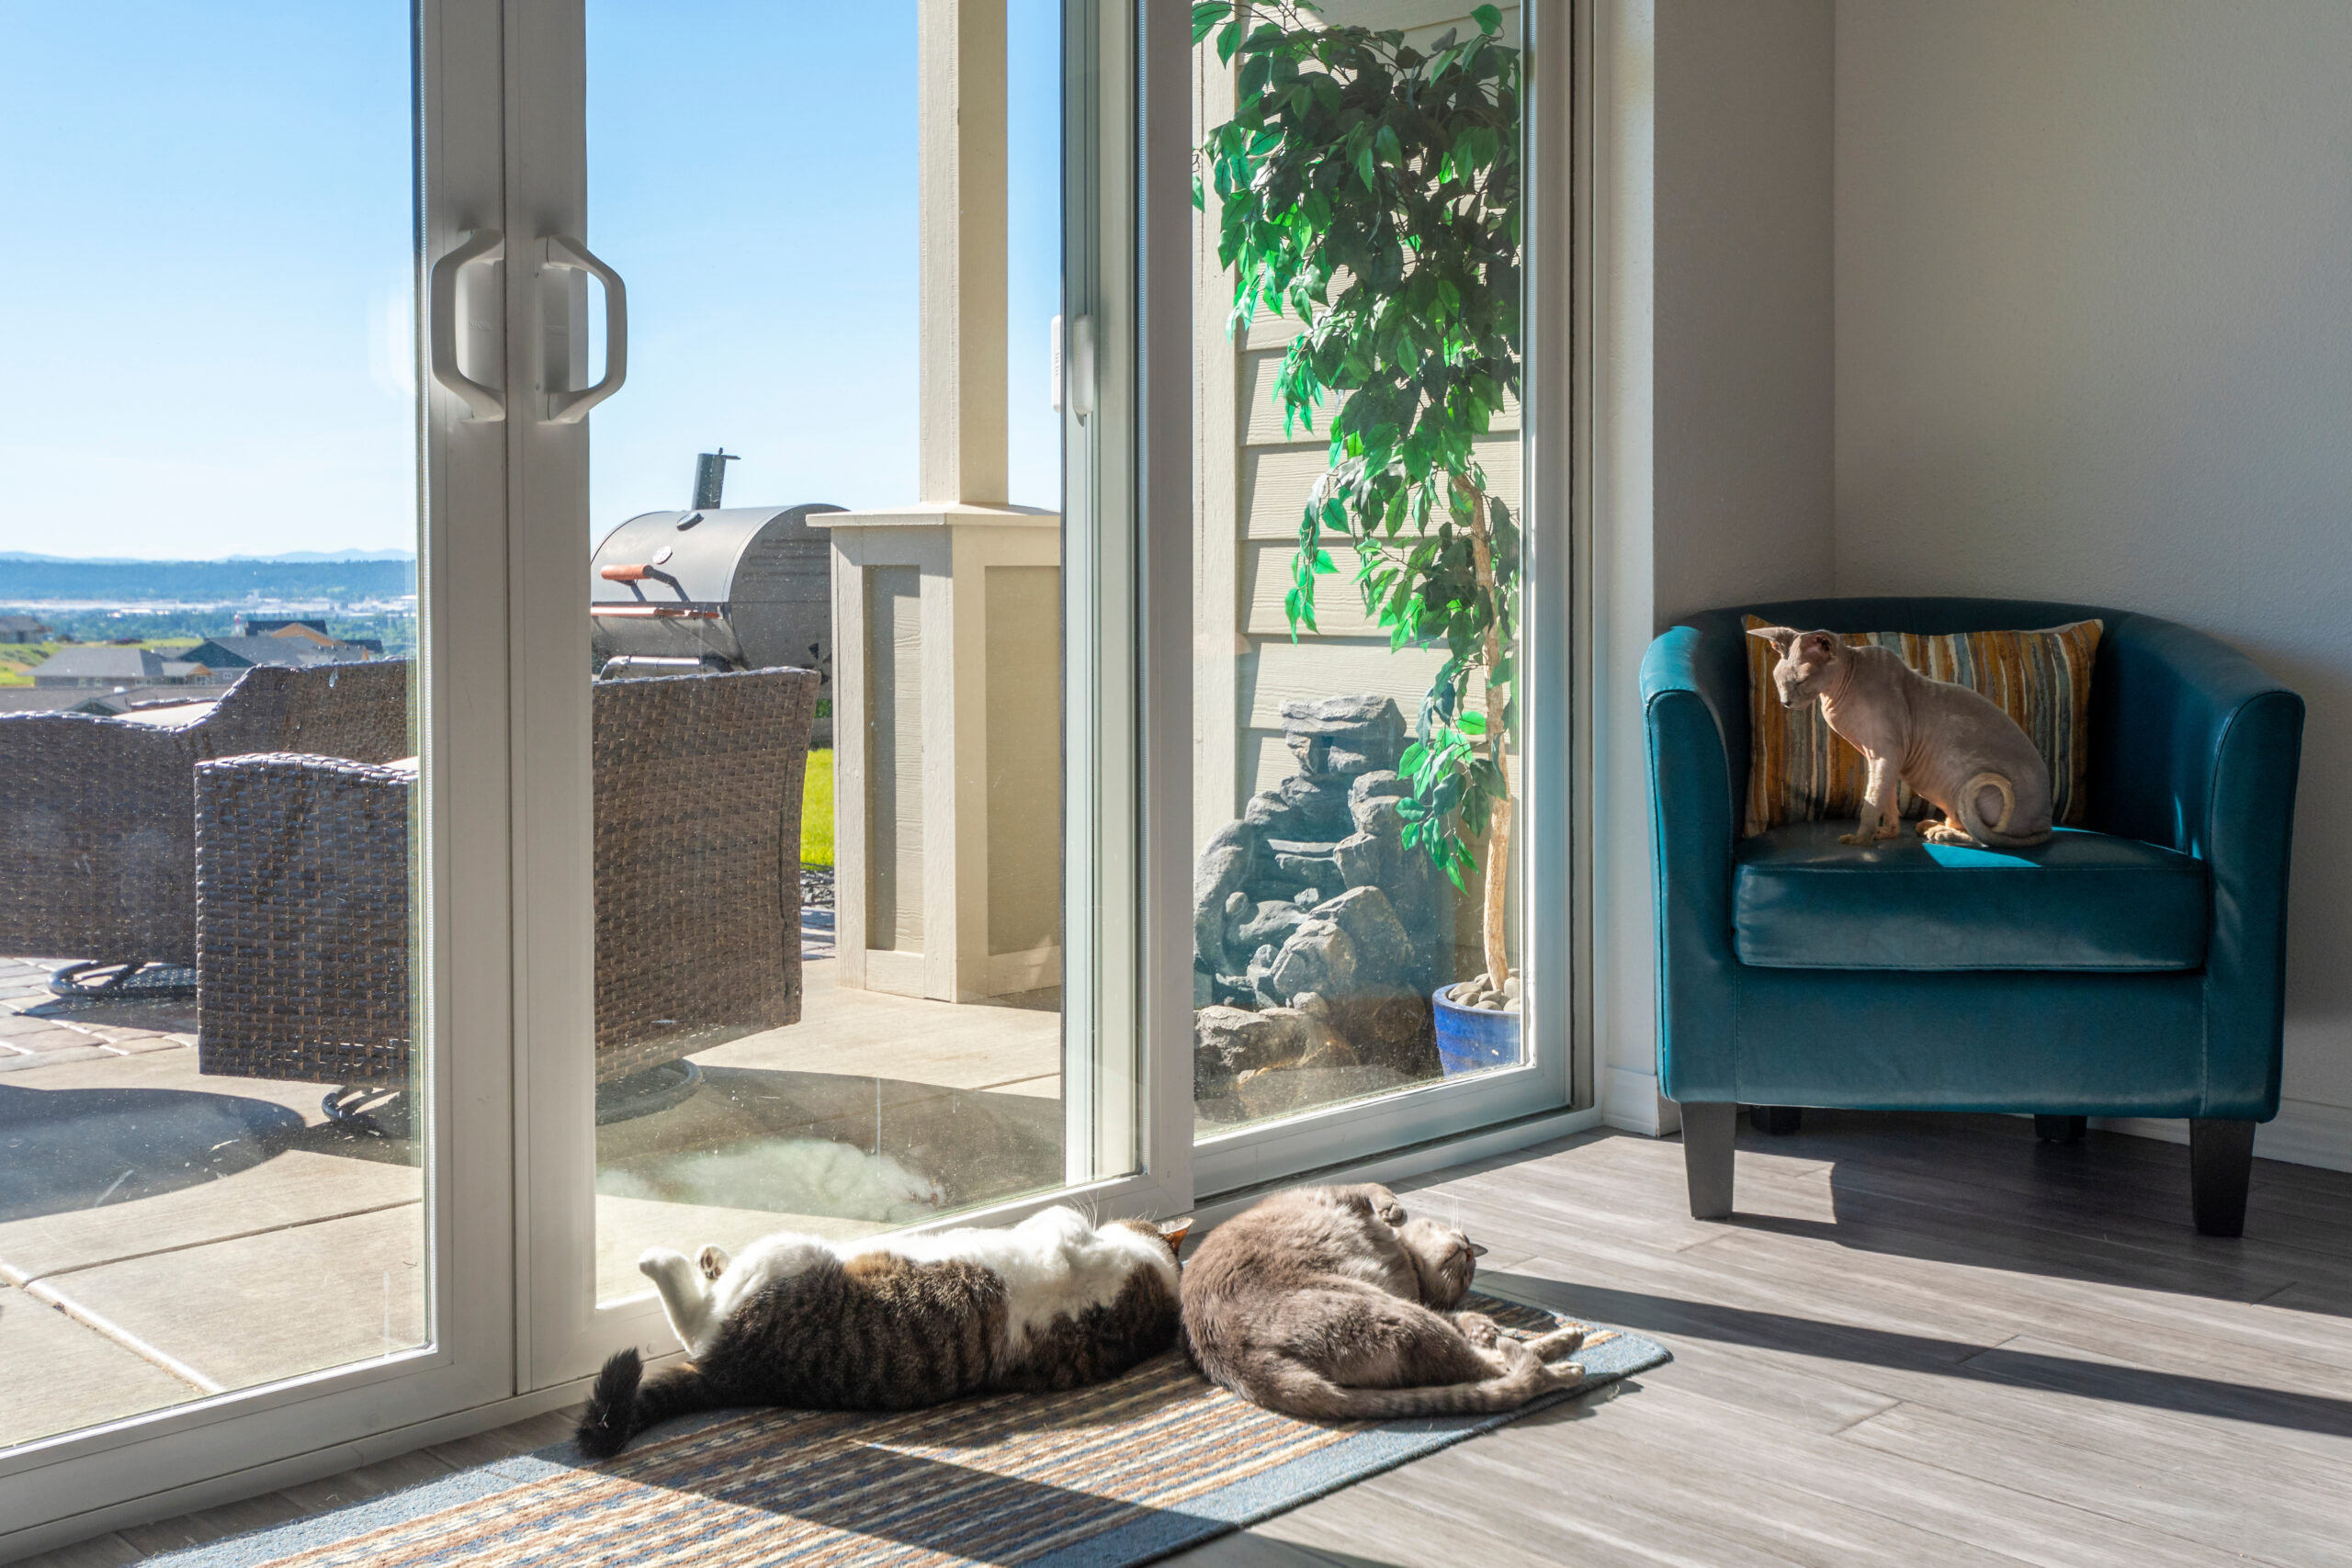 Image of energy efficient sliding doors and pets